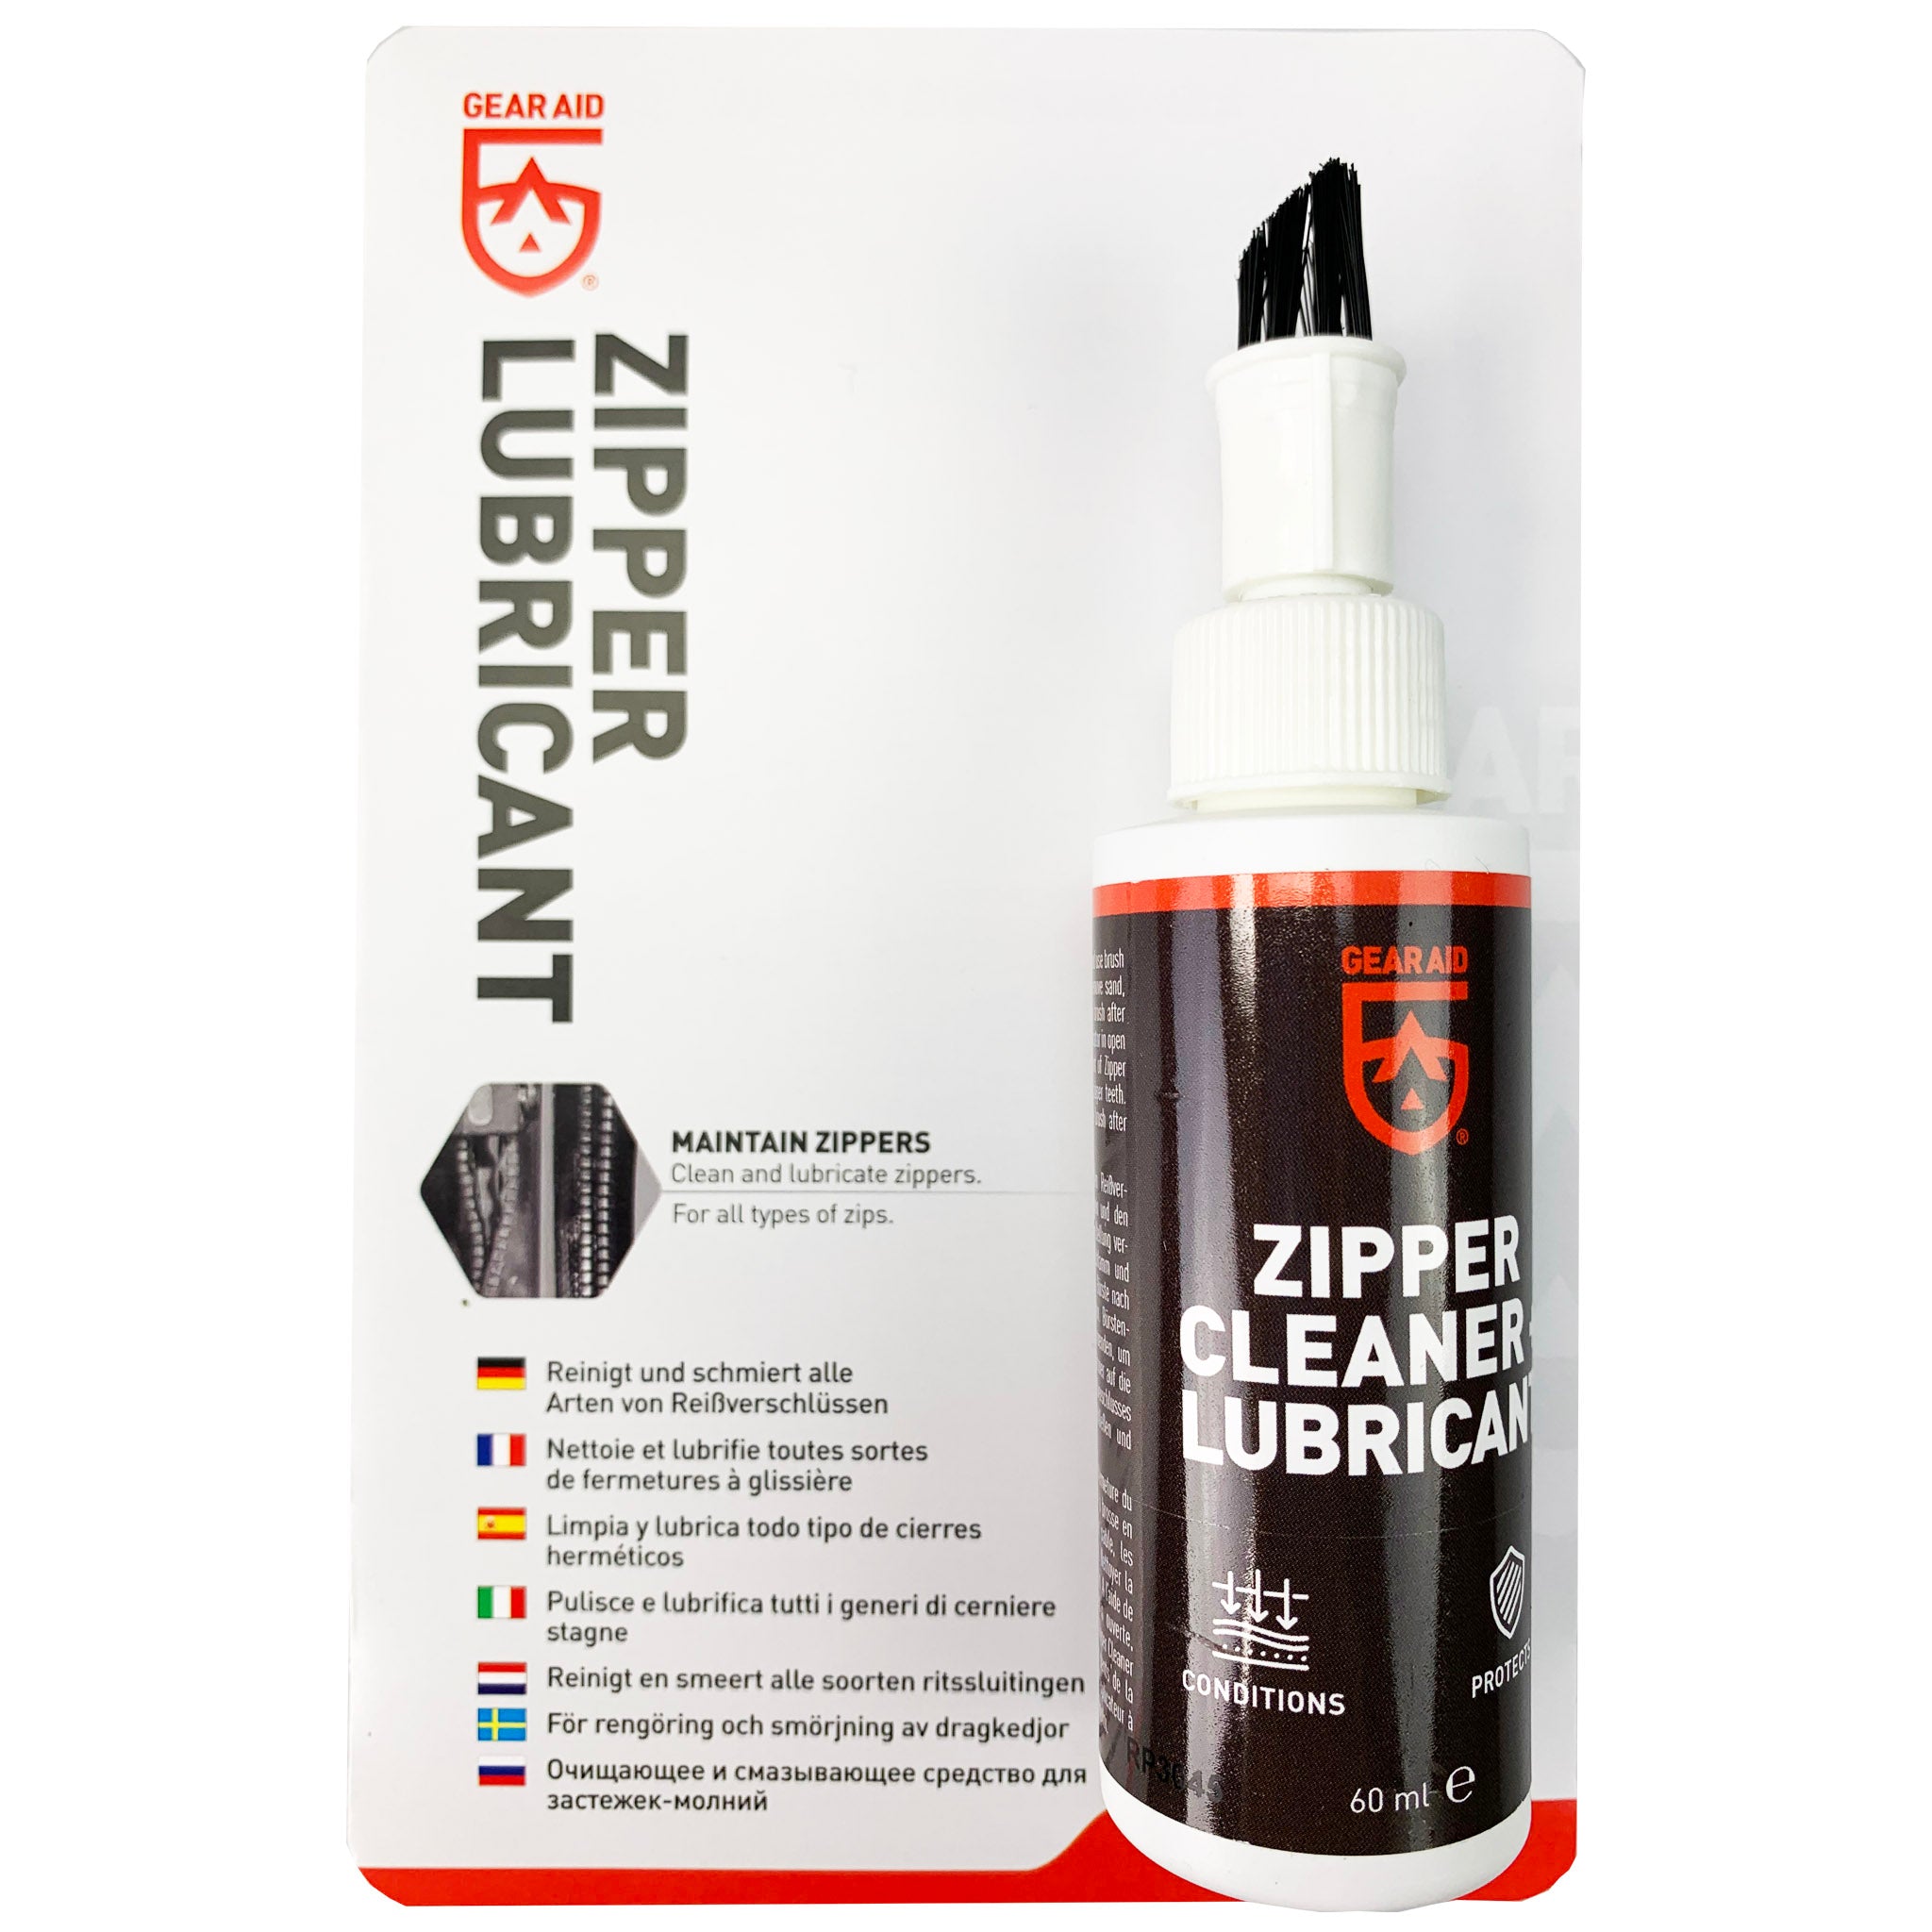 Gear Aid by McNett Zip Care Lubricant and Zip Cleaner